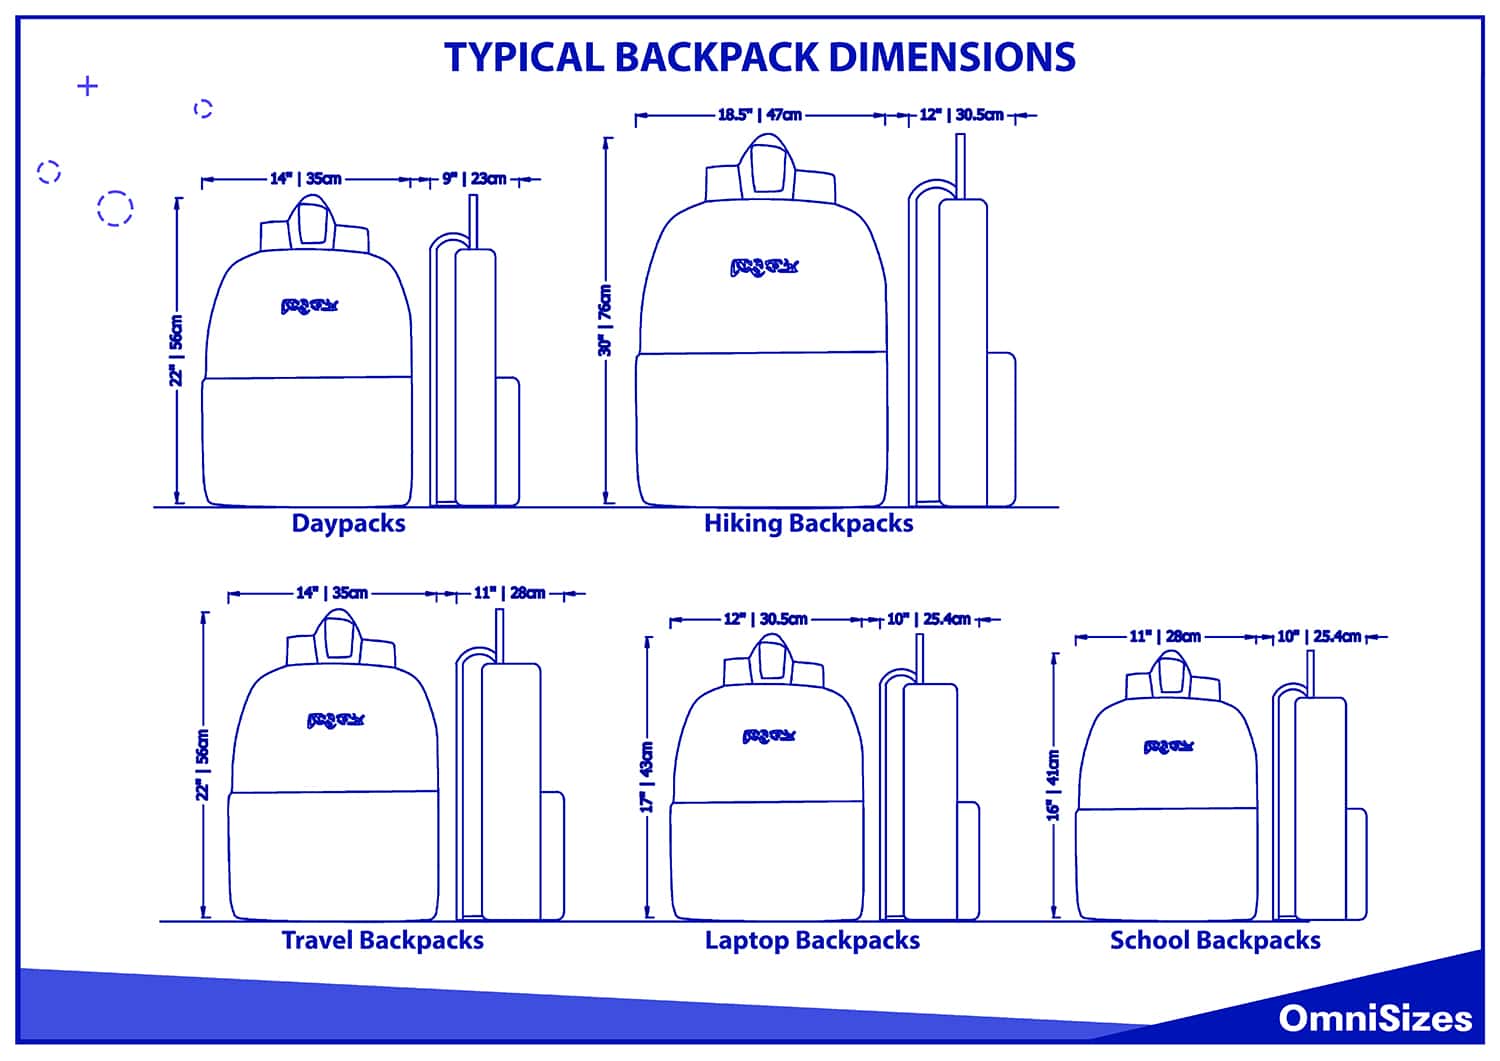 Typical backpack dimensions